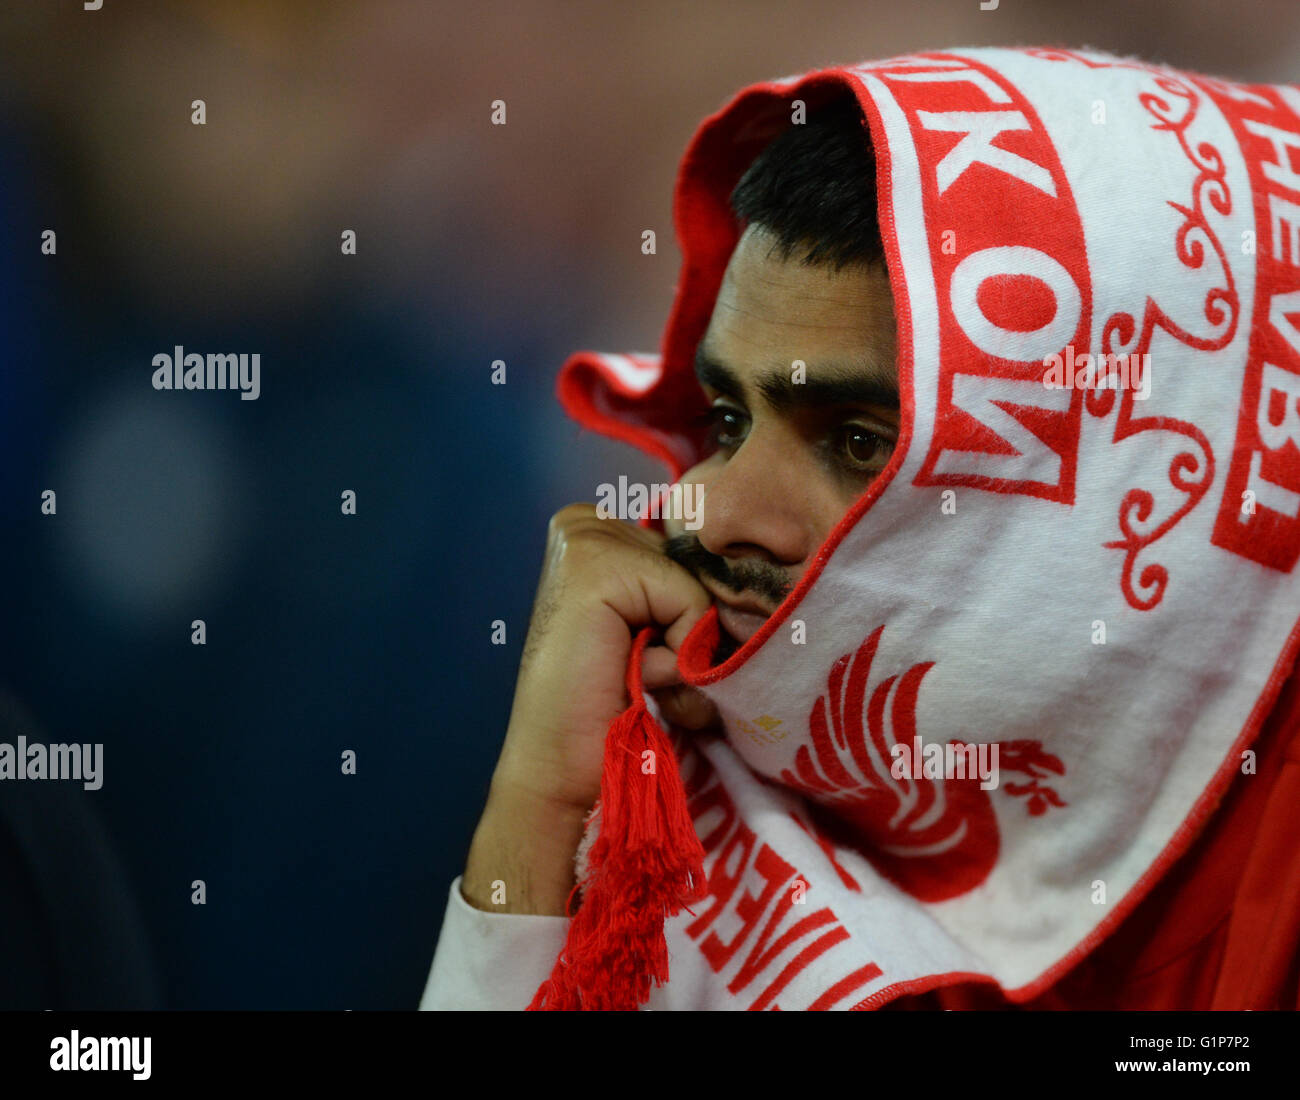 Basel, Switzerland. 18th May, 2016. Liverpool's supporter reacts during the UEFA Europa League final between Liverpool FC and Sevilla Futbol Club at the St. Jakob-Park stadium in Basel, Switzerland, on 18 May 2016. Credit:  dpa picture alliance/Alamy Live News Stock Photo